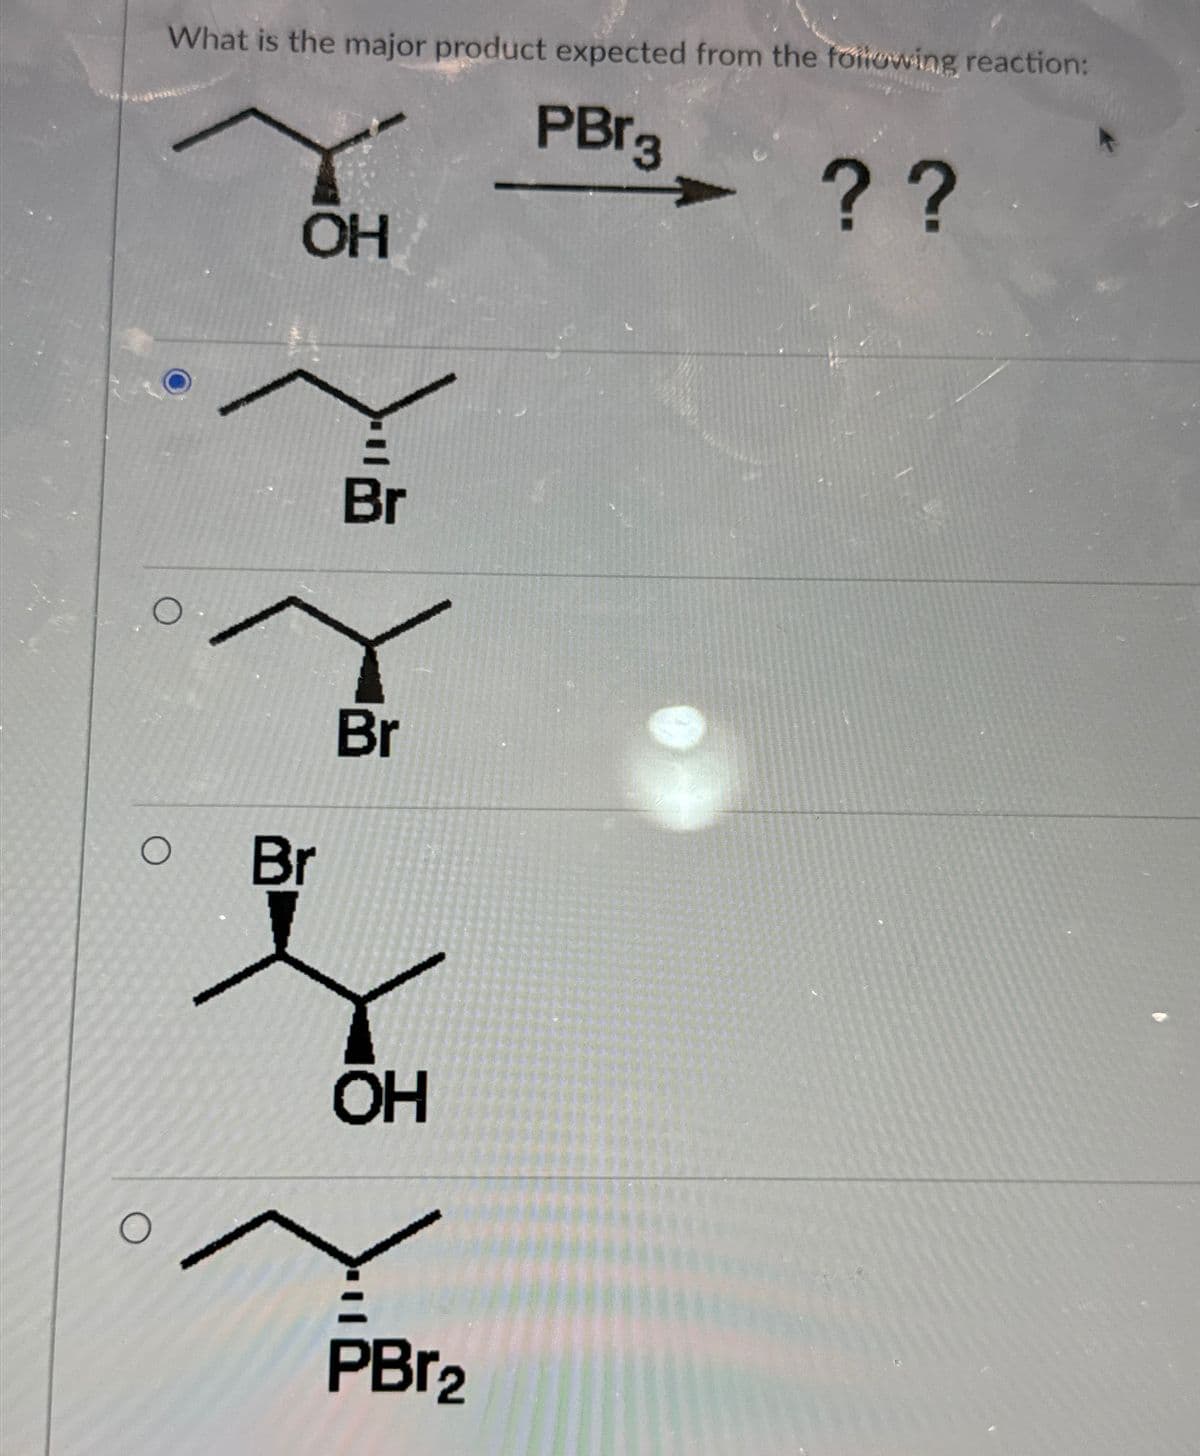 What is the major product expected from the following reaction:
PBr3
O
O
OH
O Br
Br
Br
OH
PBr2
??